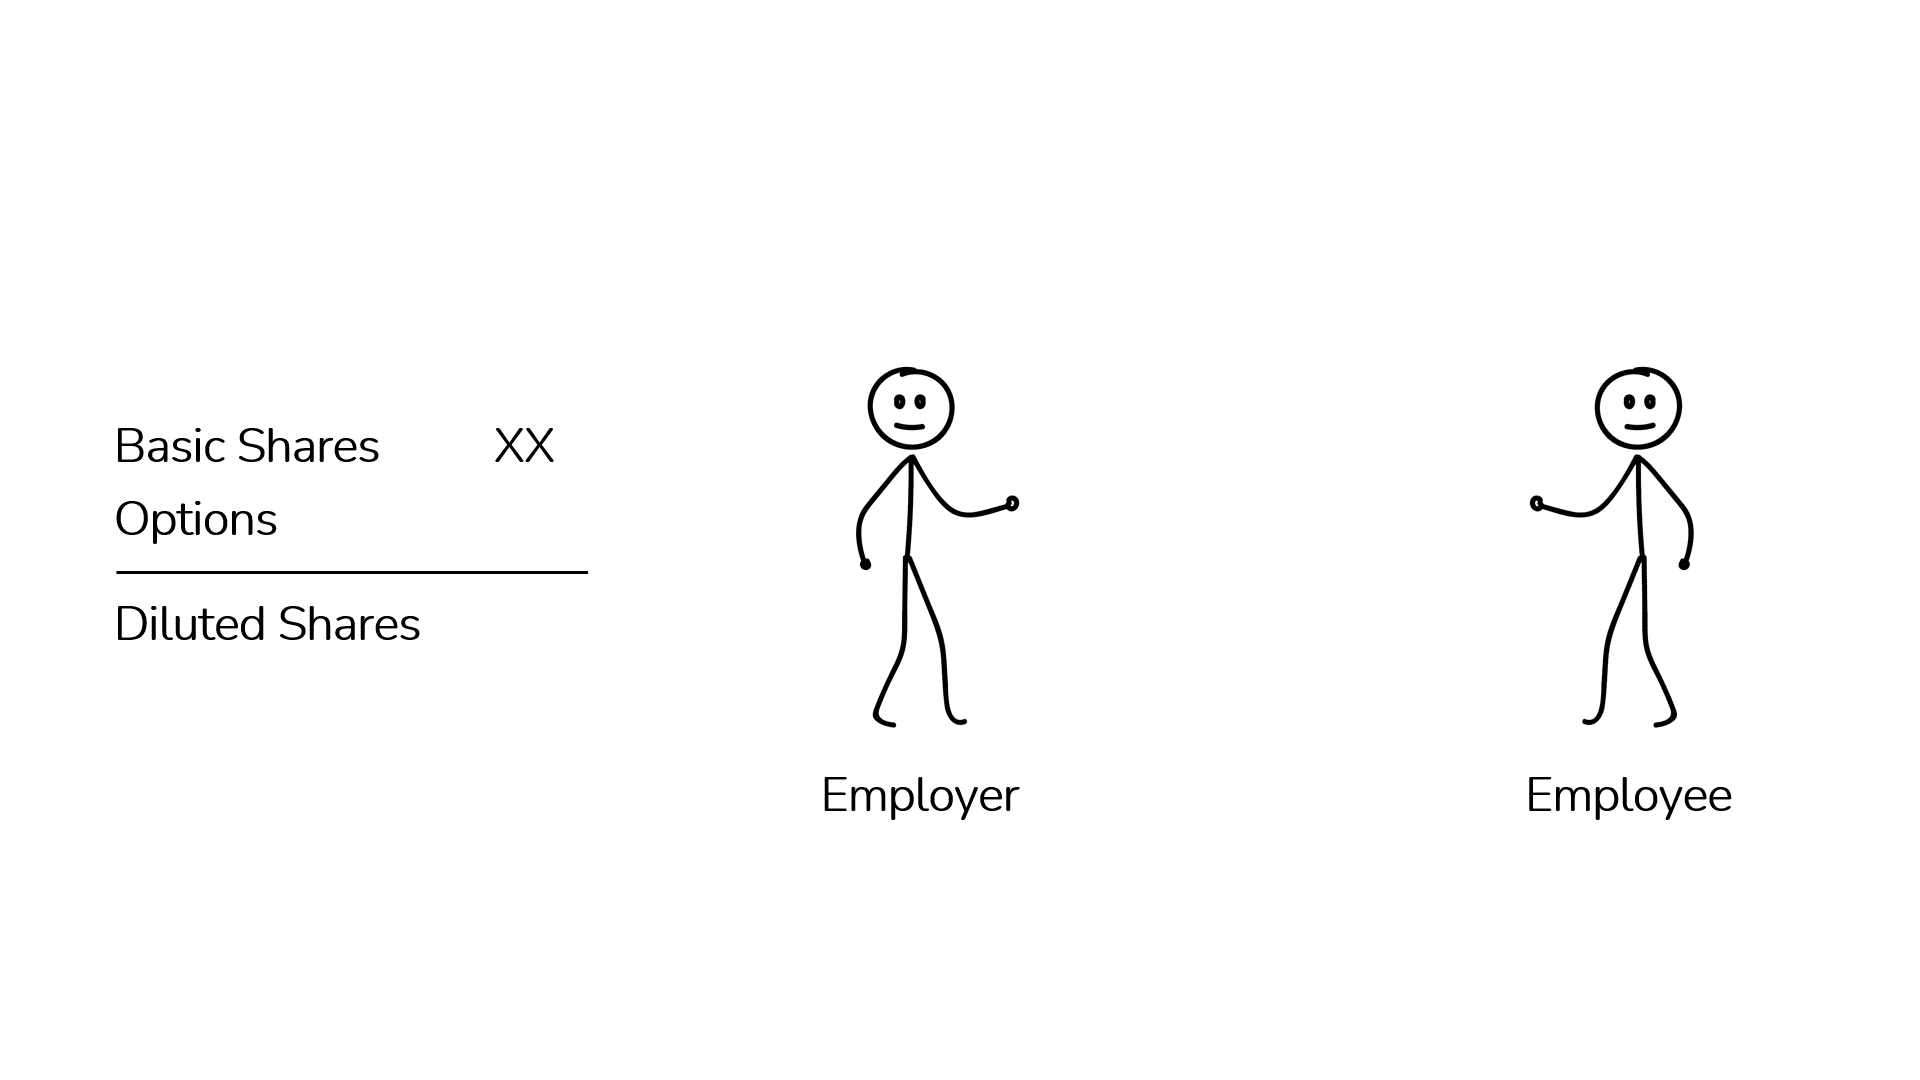 An animation showing an employee exercising their options and paying the employer.